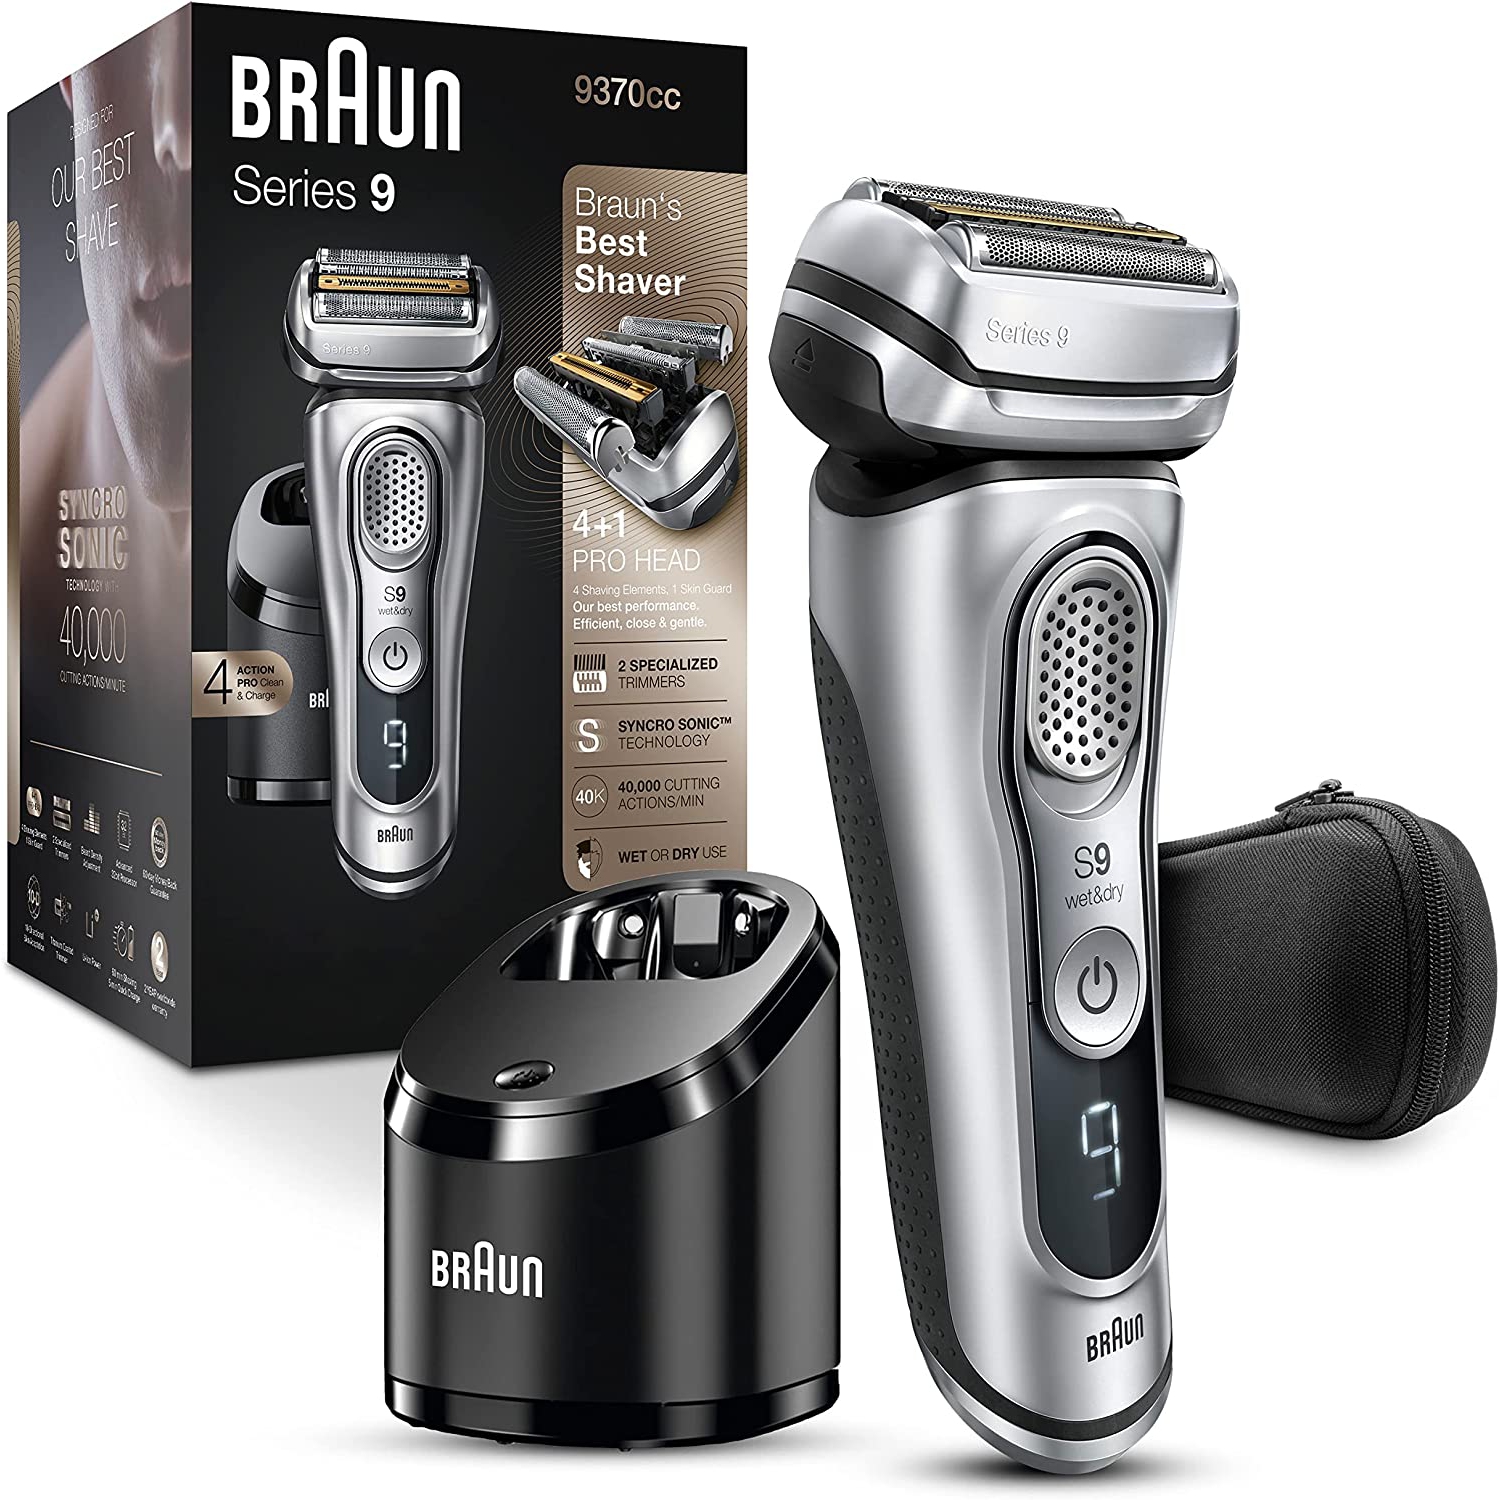 Braun Series 9290CC Men's Electric Foil Shaver /Razor, Wet & Dry, Travel Case with Clean & Charge System